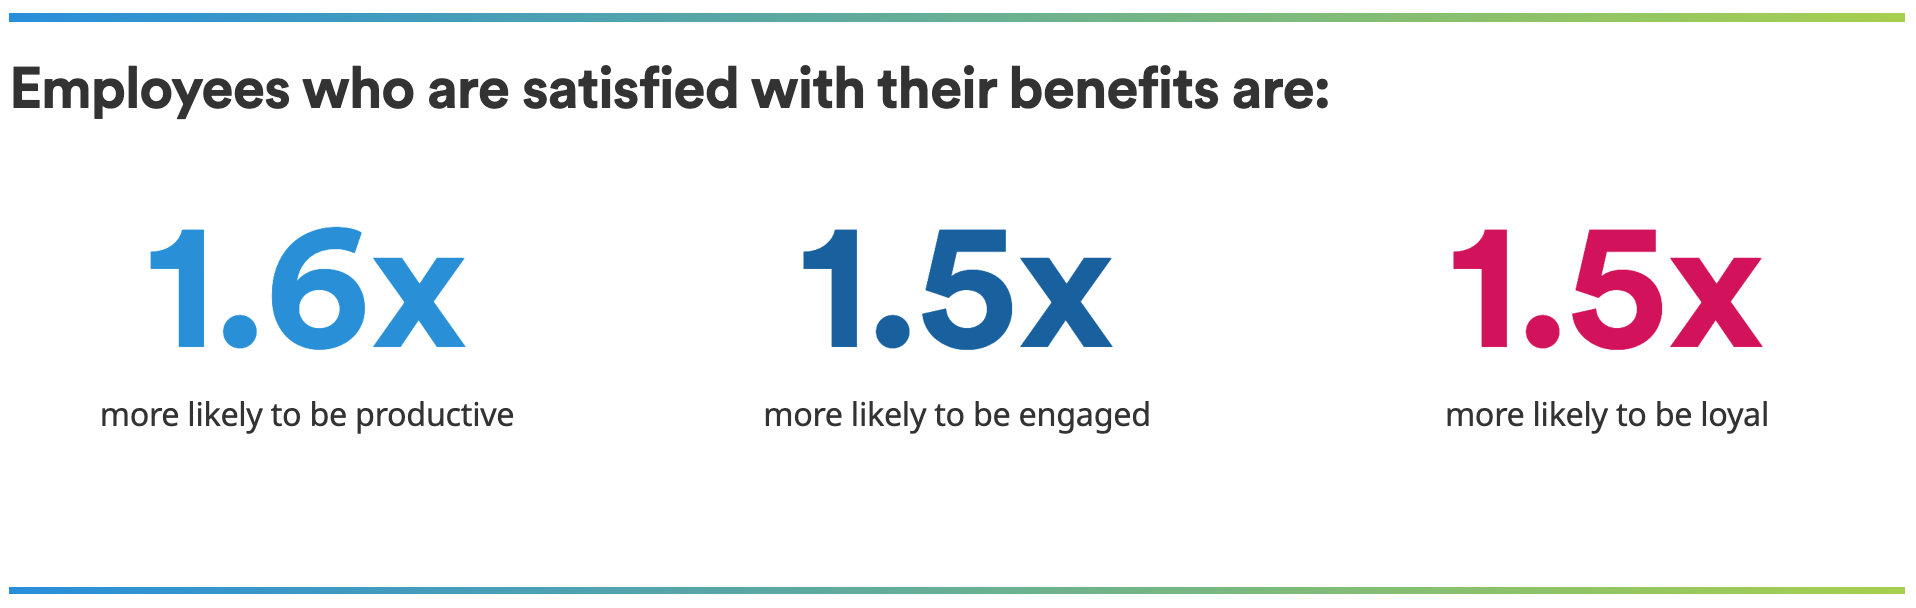 MetLife - Enmployees who are satisfied with the benefits are 1.6x more likely to be productive, 1.5x more likely to be engaged, and 1.5x more like to be loyal.